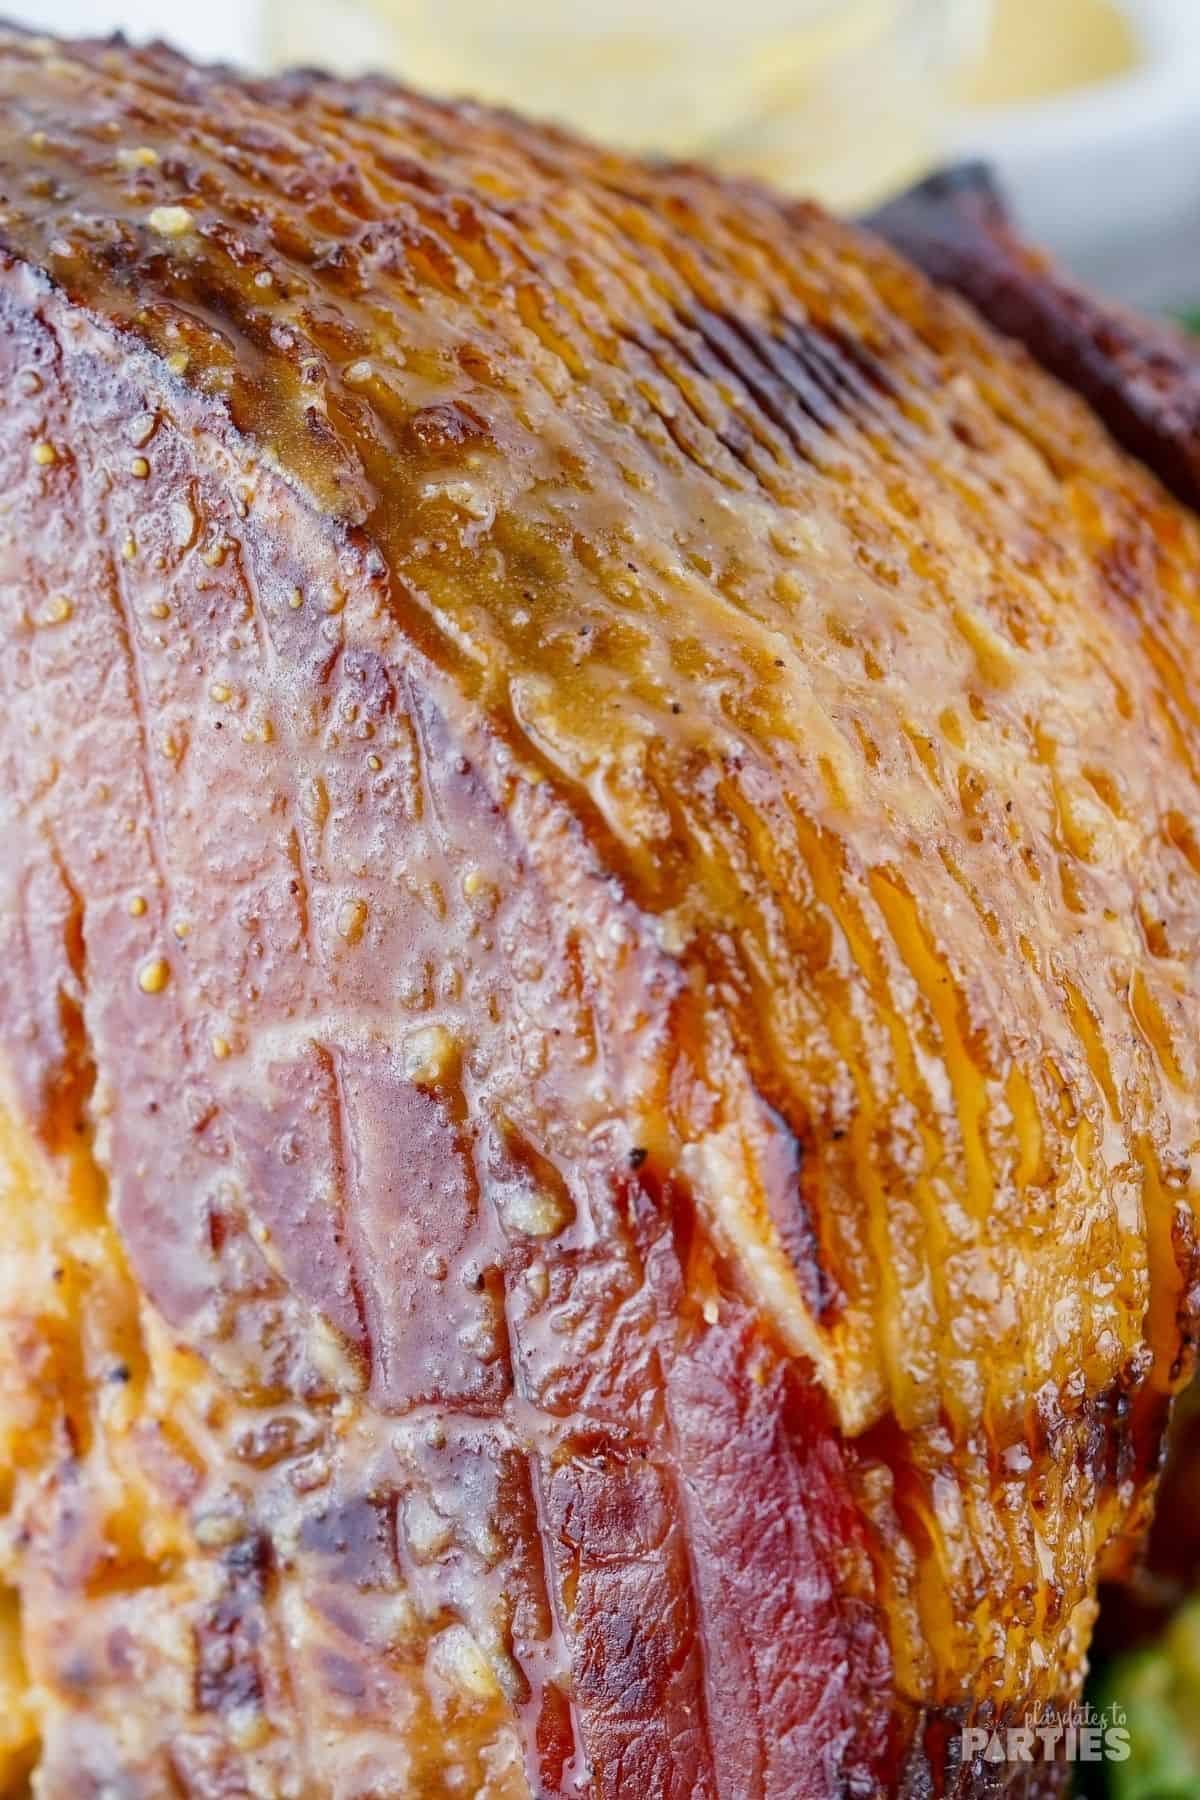 When you look close up the ham glistens with glaze.